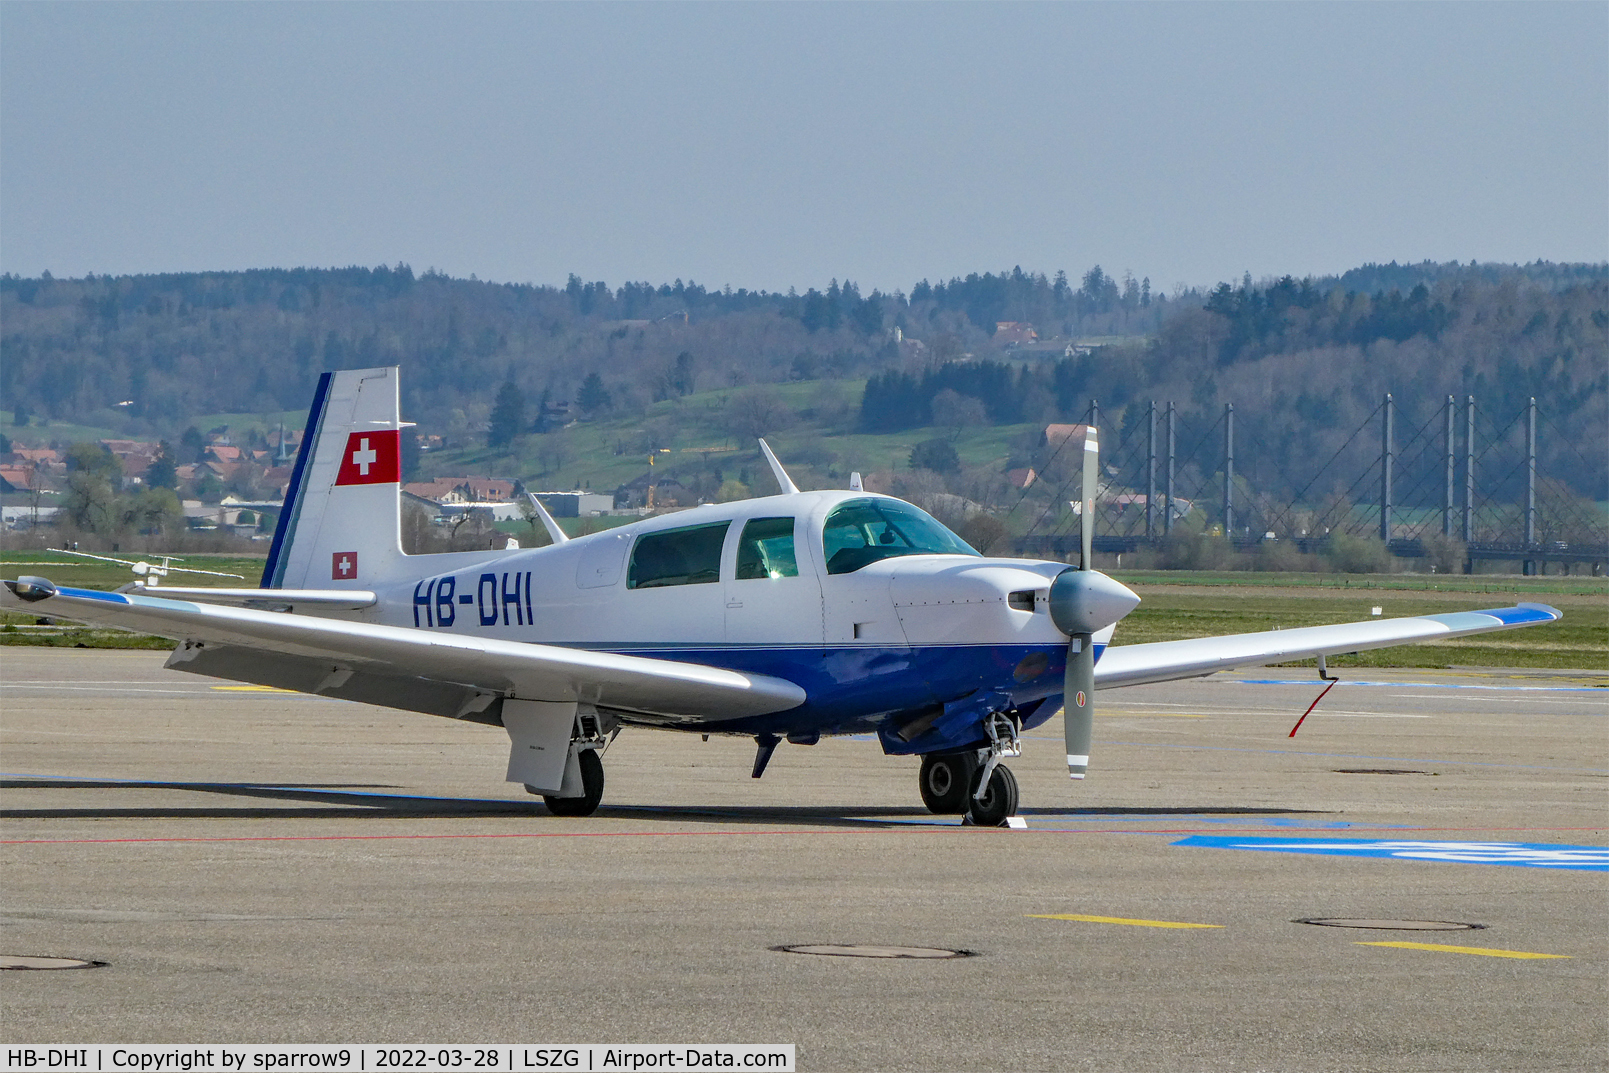 HB-DHI, 1980 Mooney M20J 201 C/N 24-1039, At Grenchen